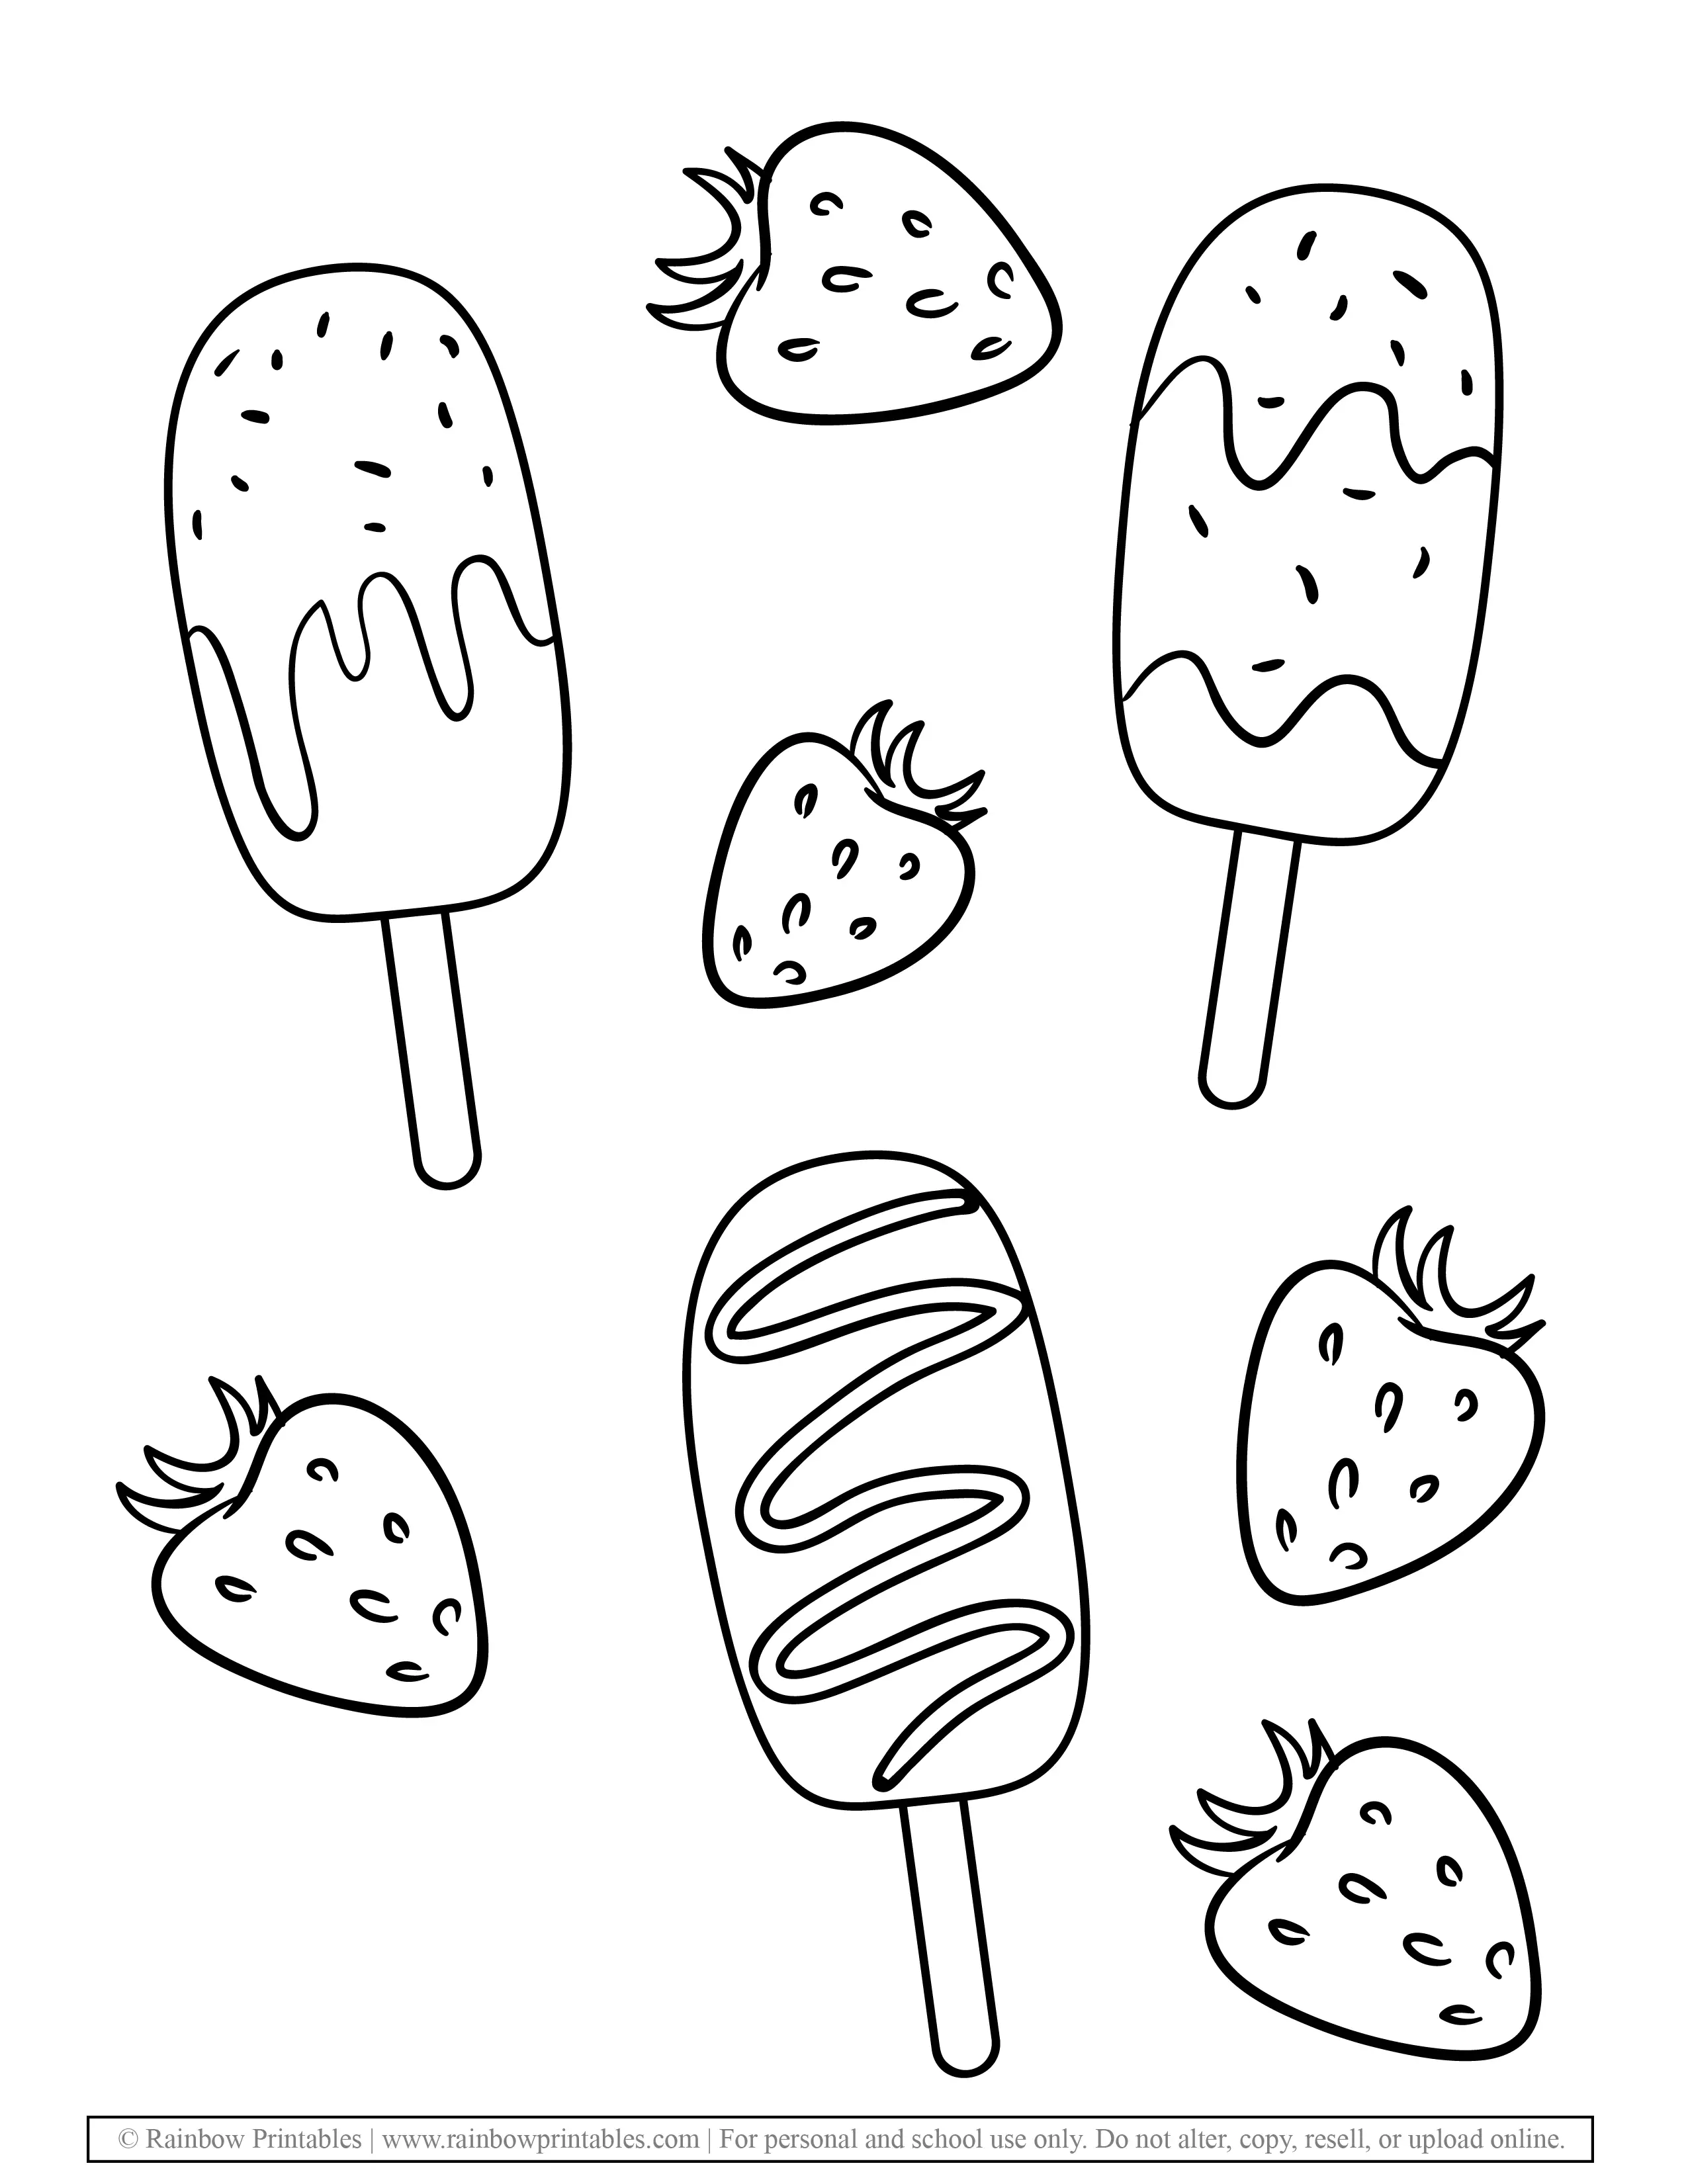 Fruit Strawberry Popsicle Flavor Ice Desserts Treat on Sticks Coloring Pages for Kids